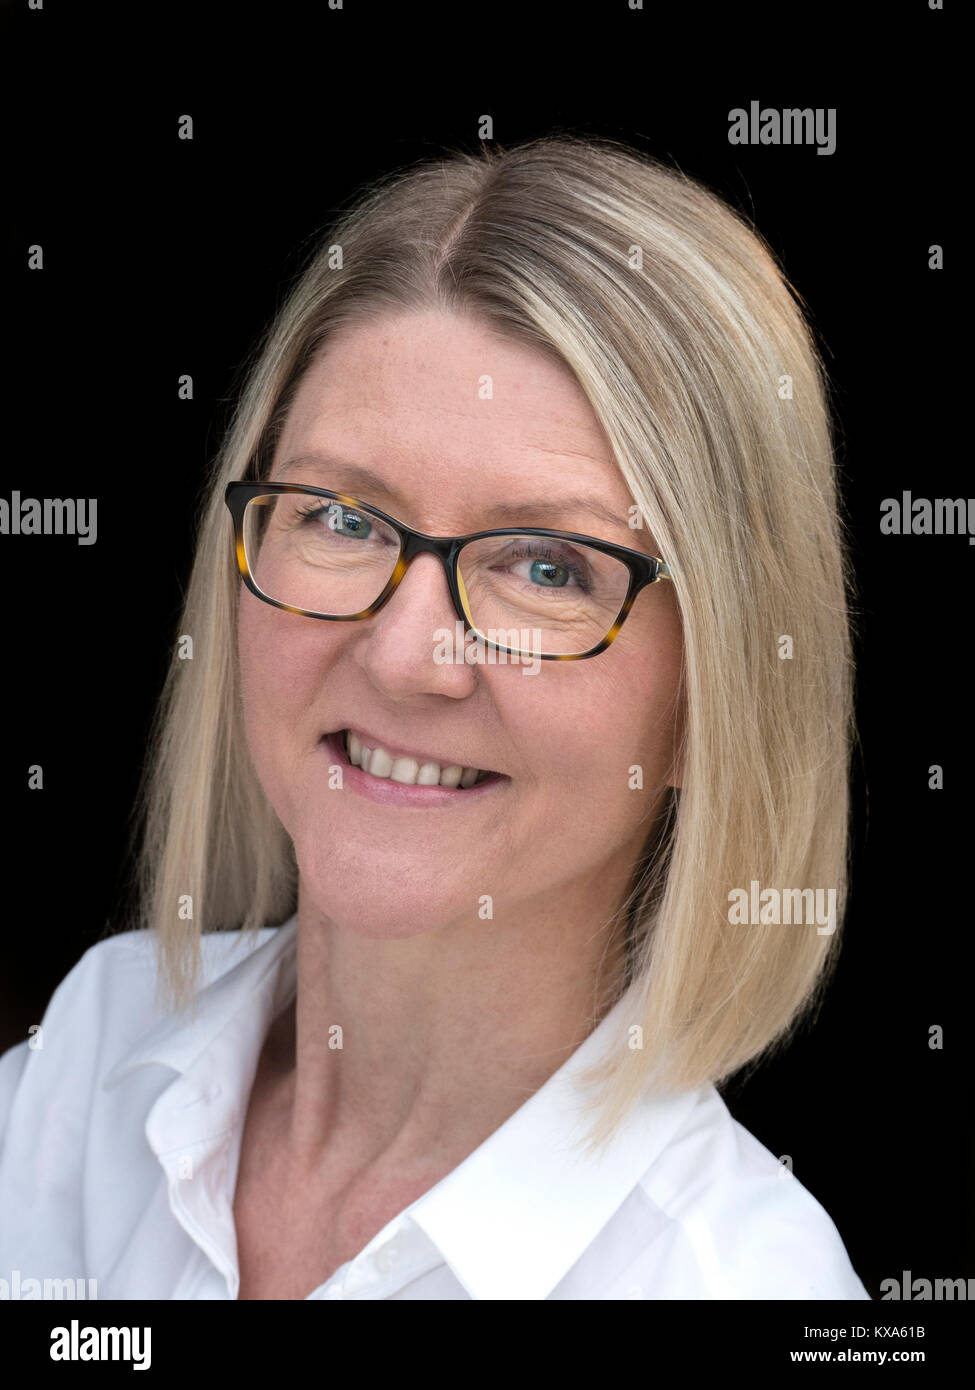 Female Executive Blond 40-45 yrs attractive confident successful executive business woman in white blouse top wearing glasses smiling facing camera Stock Photo